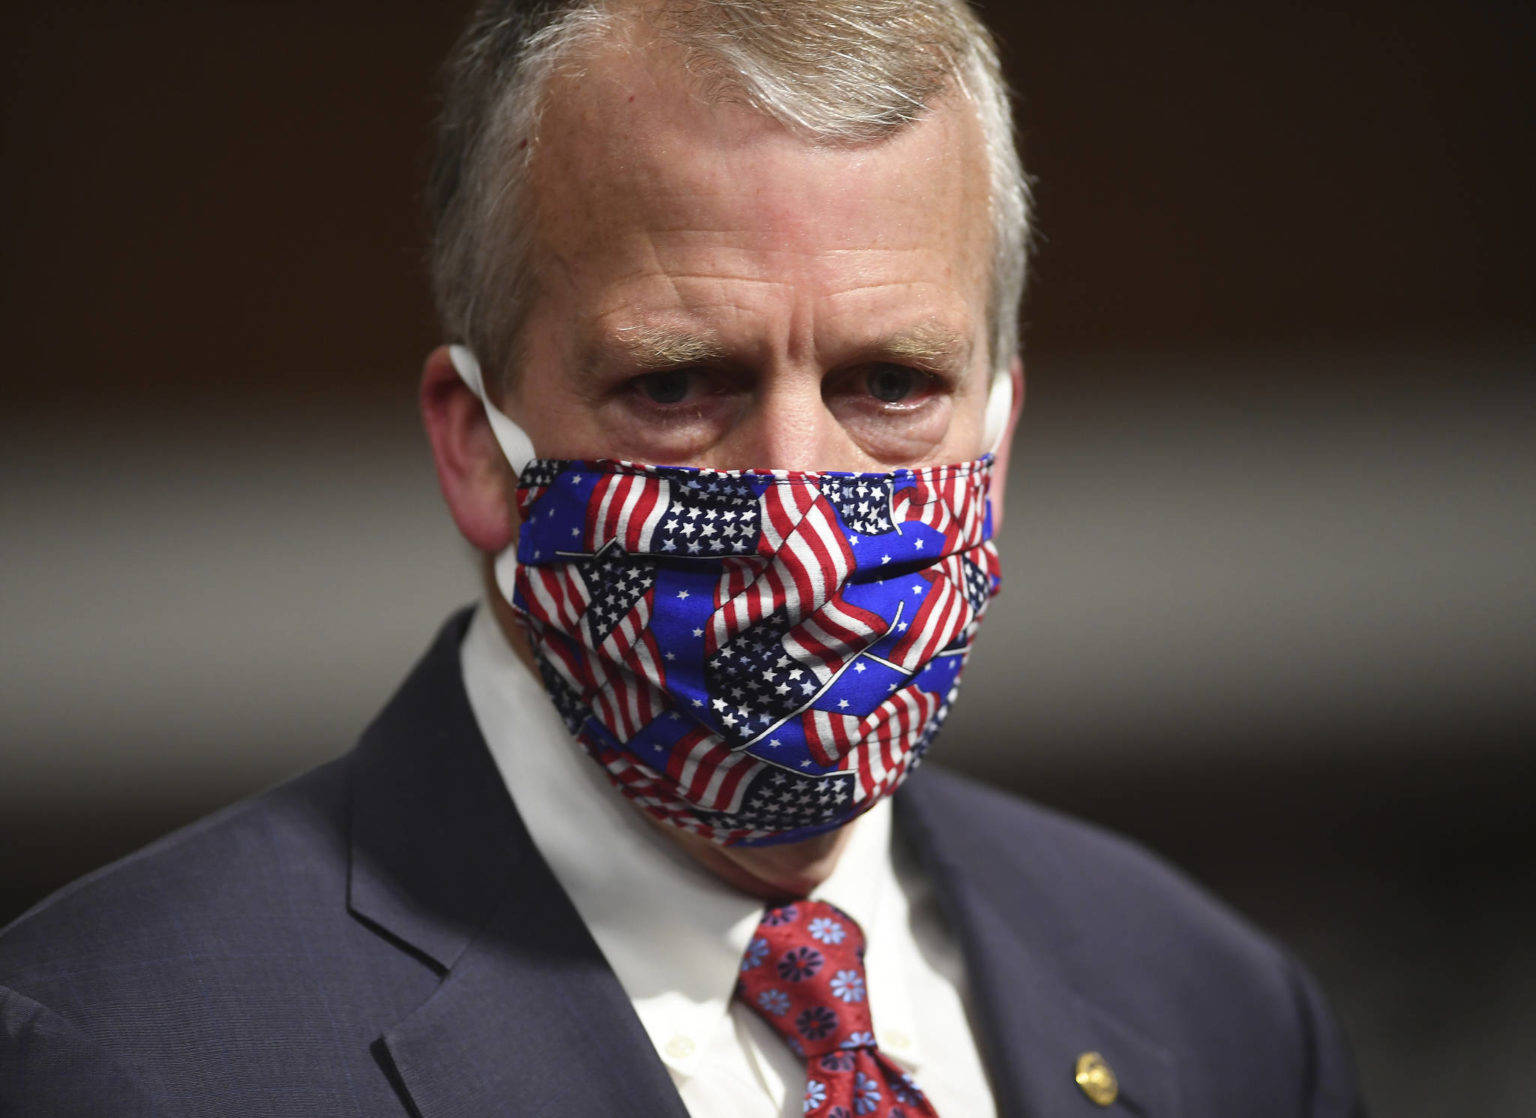 In this May 7, 2020 photo, Sen. Dan Sullivan wears a mask at a hearing in Washington. (Kevin Dietsch / Pool)